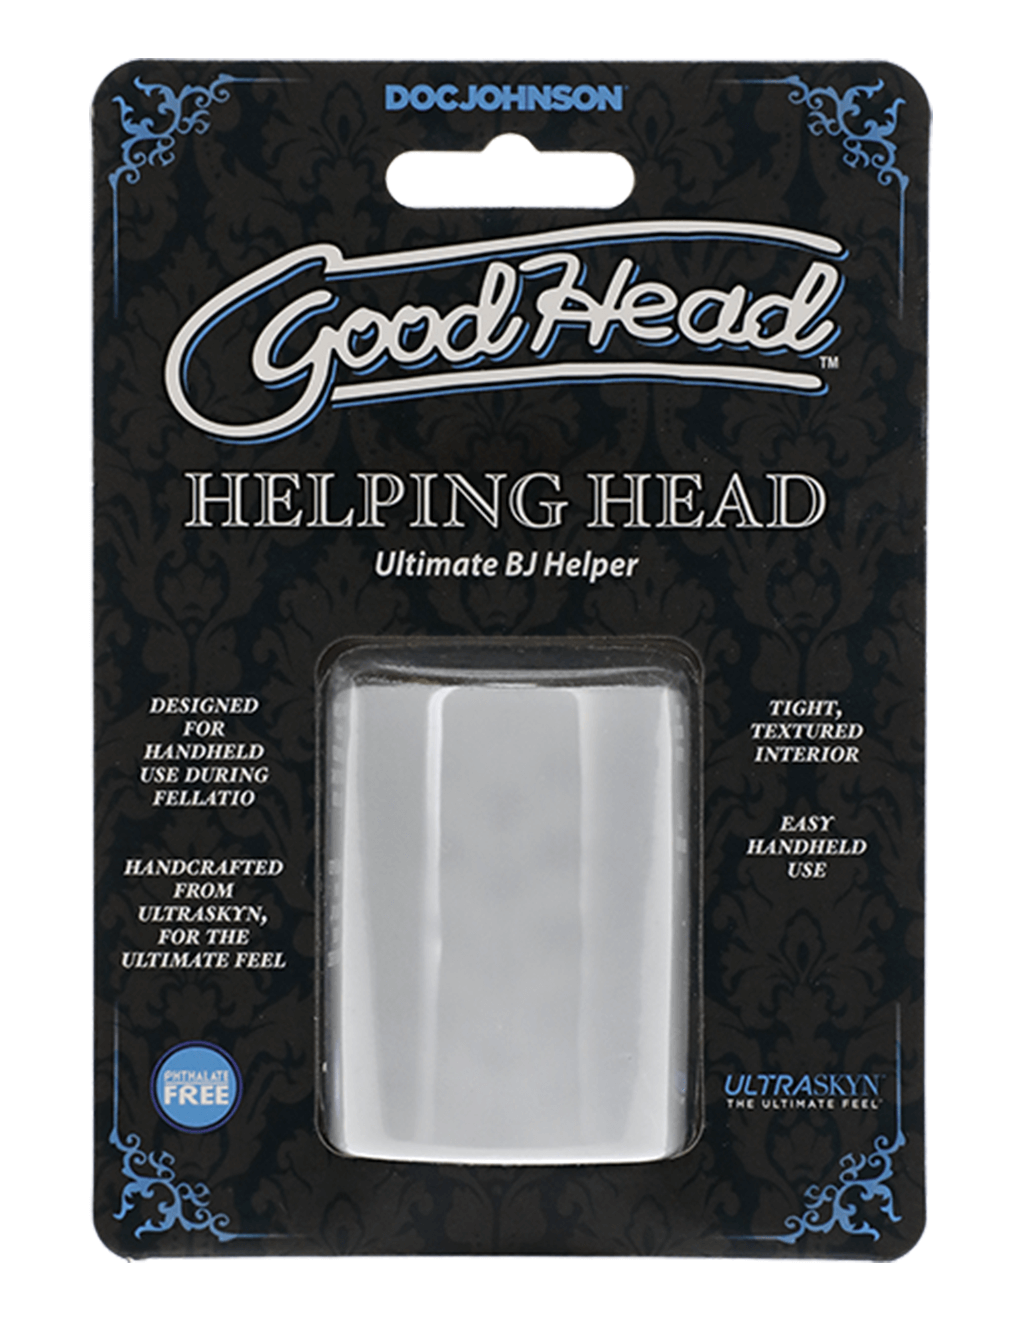 GoodHead Helping Head Silicone BJ Stroker Package